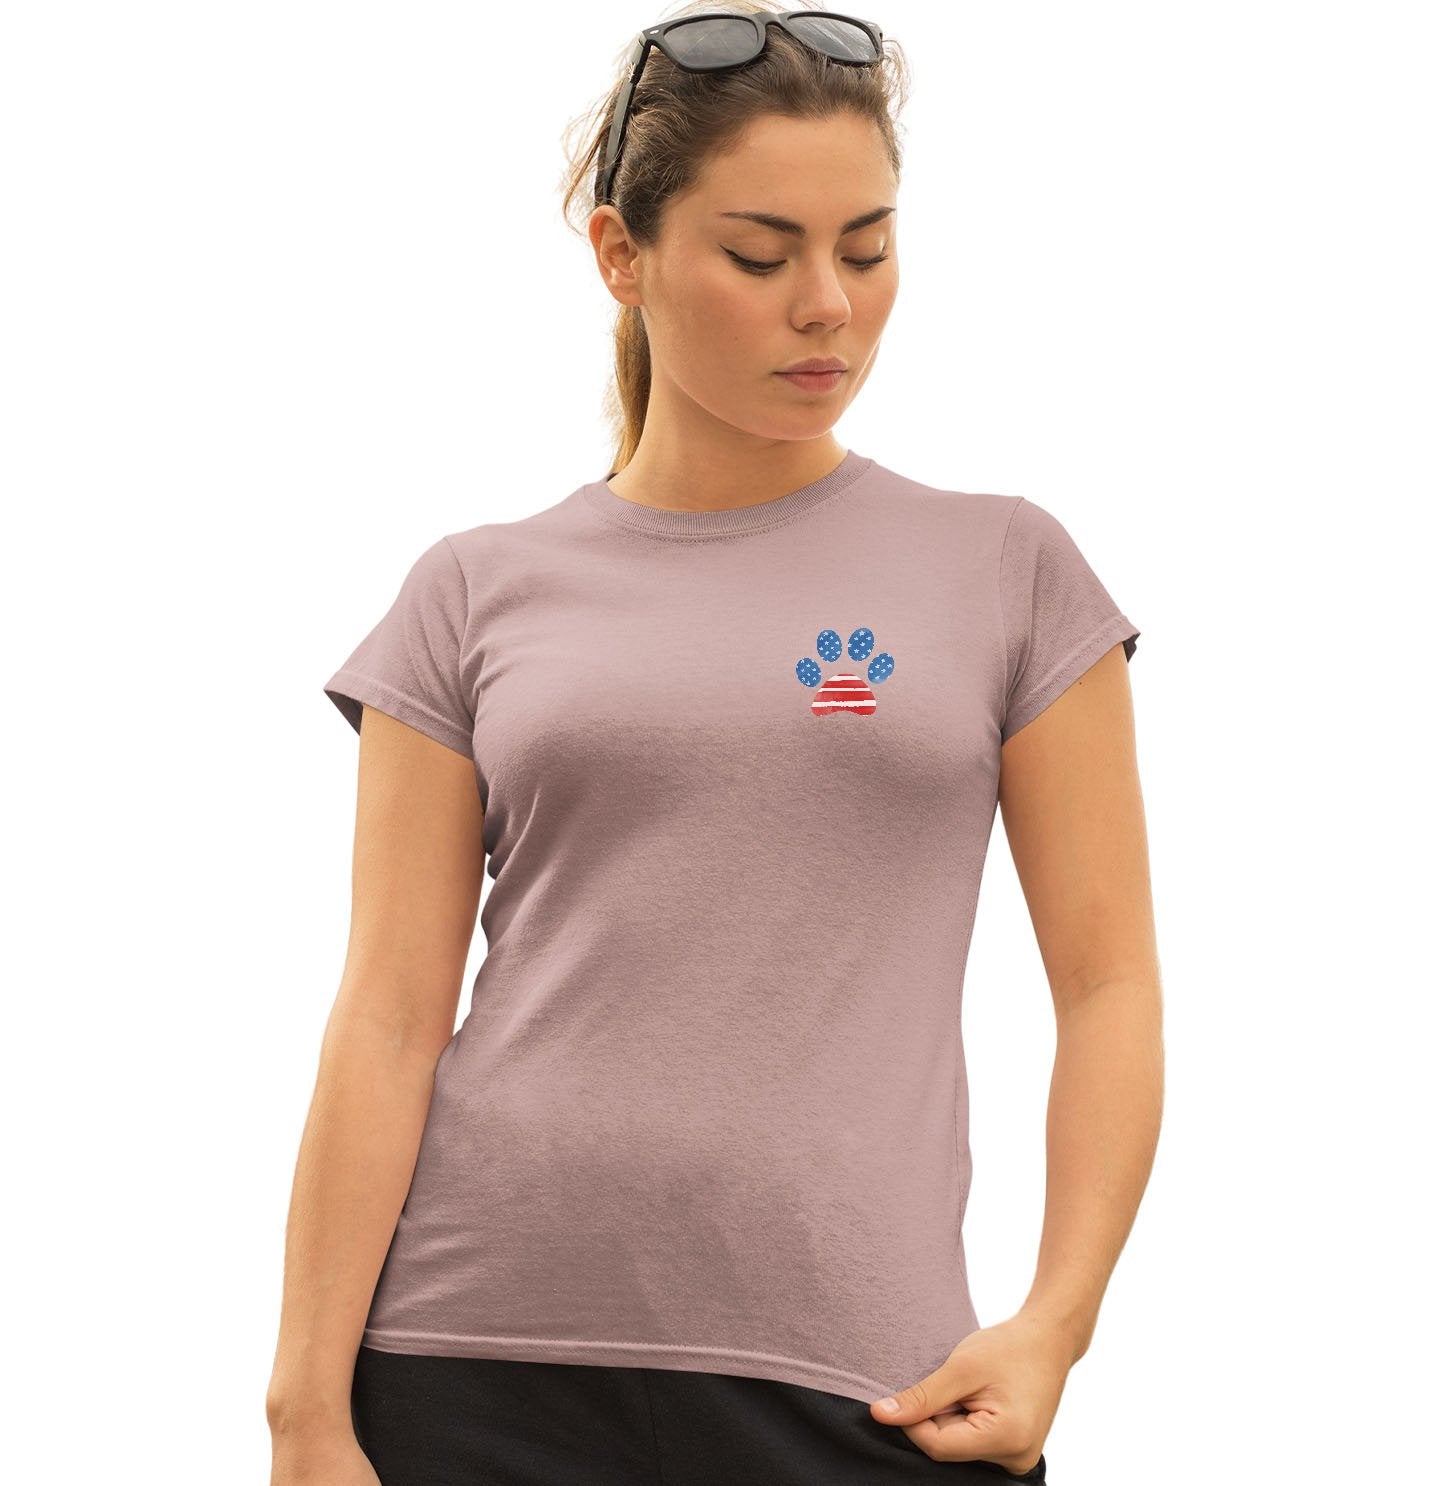 Pawtriotic Pawprint - Women's Fitted T-Shirt